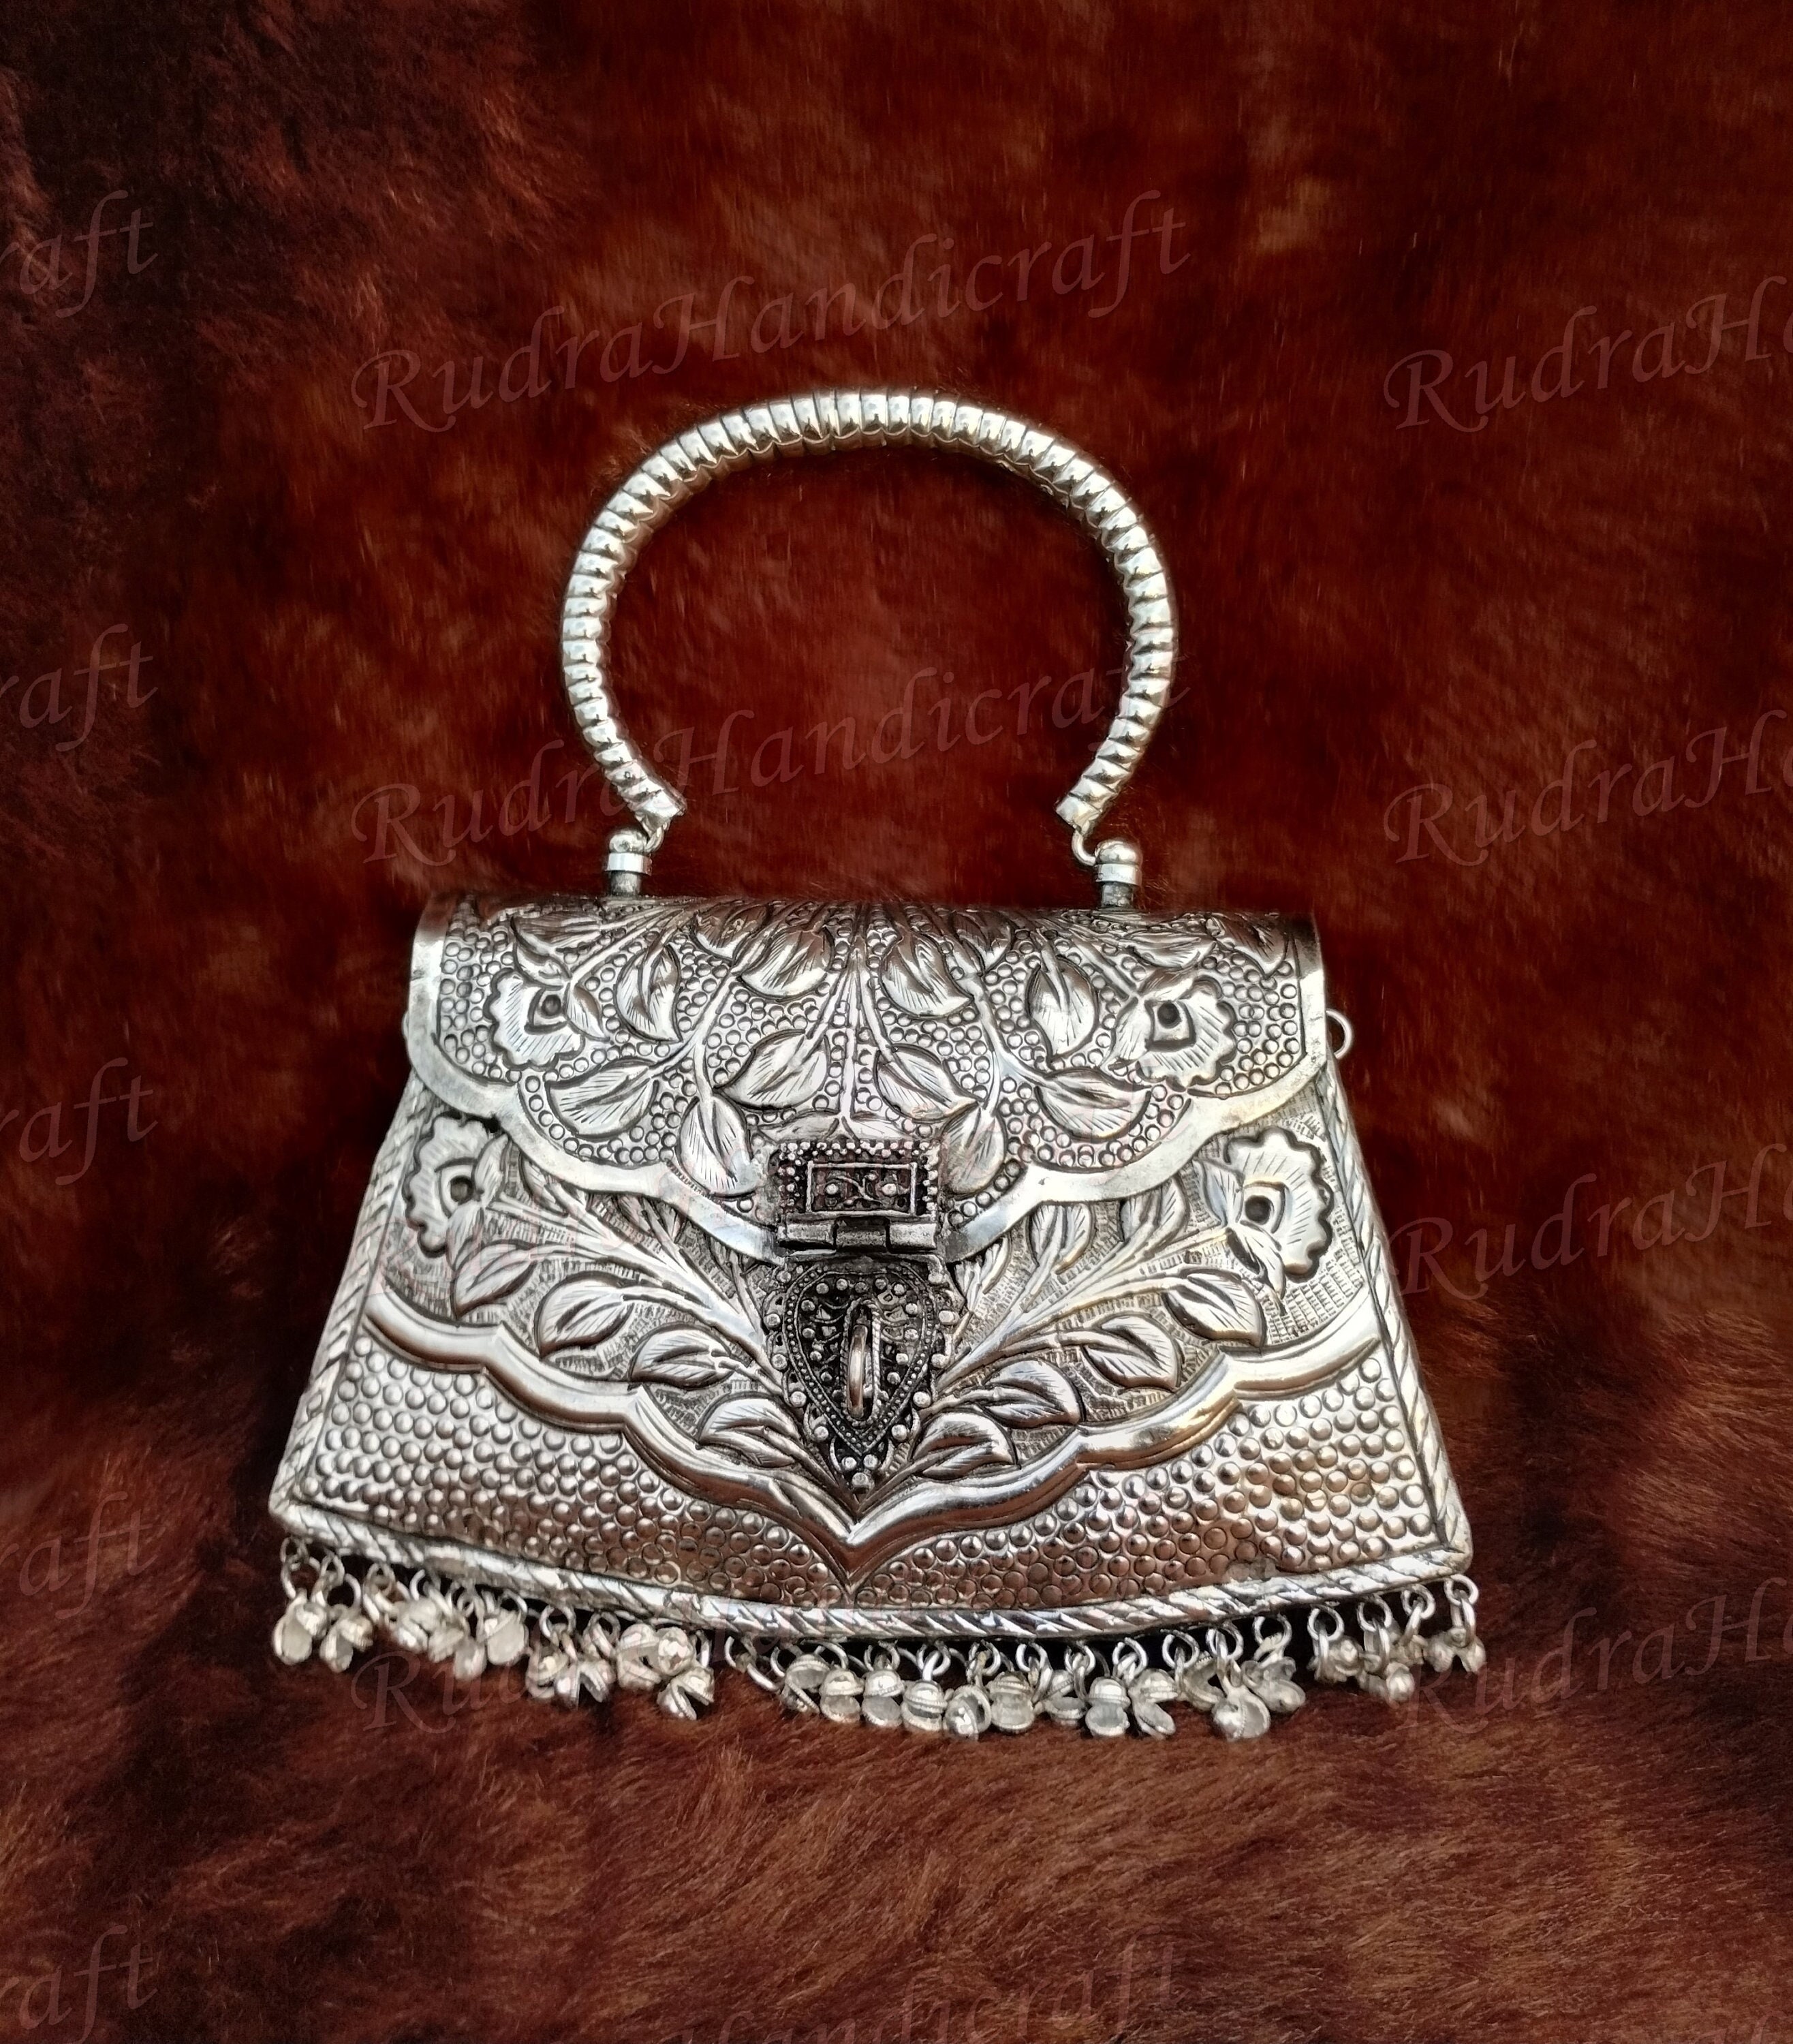 Amazing Multi Color Indian Pure Handcrafted Design Cylindrical Antique Metal  Clutch Bag Crossbody Bag Vintage Style Purse Wallet